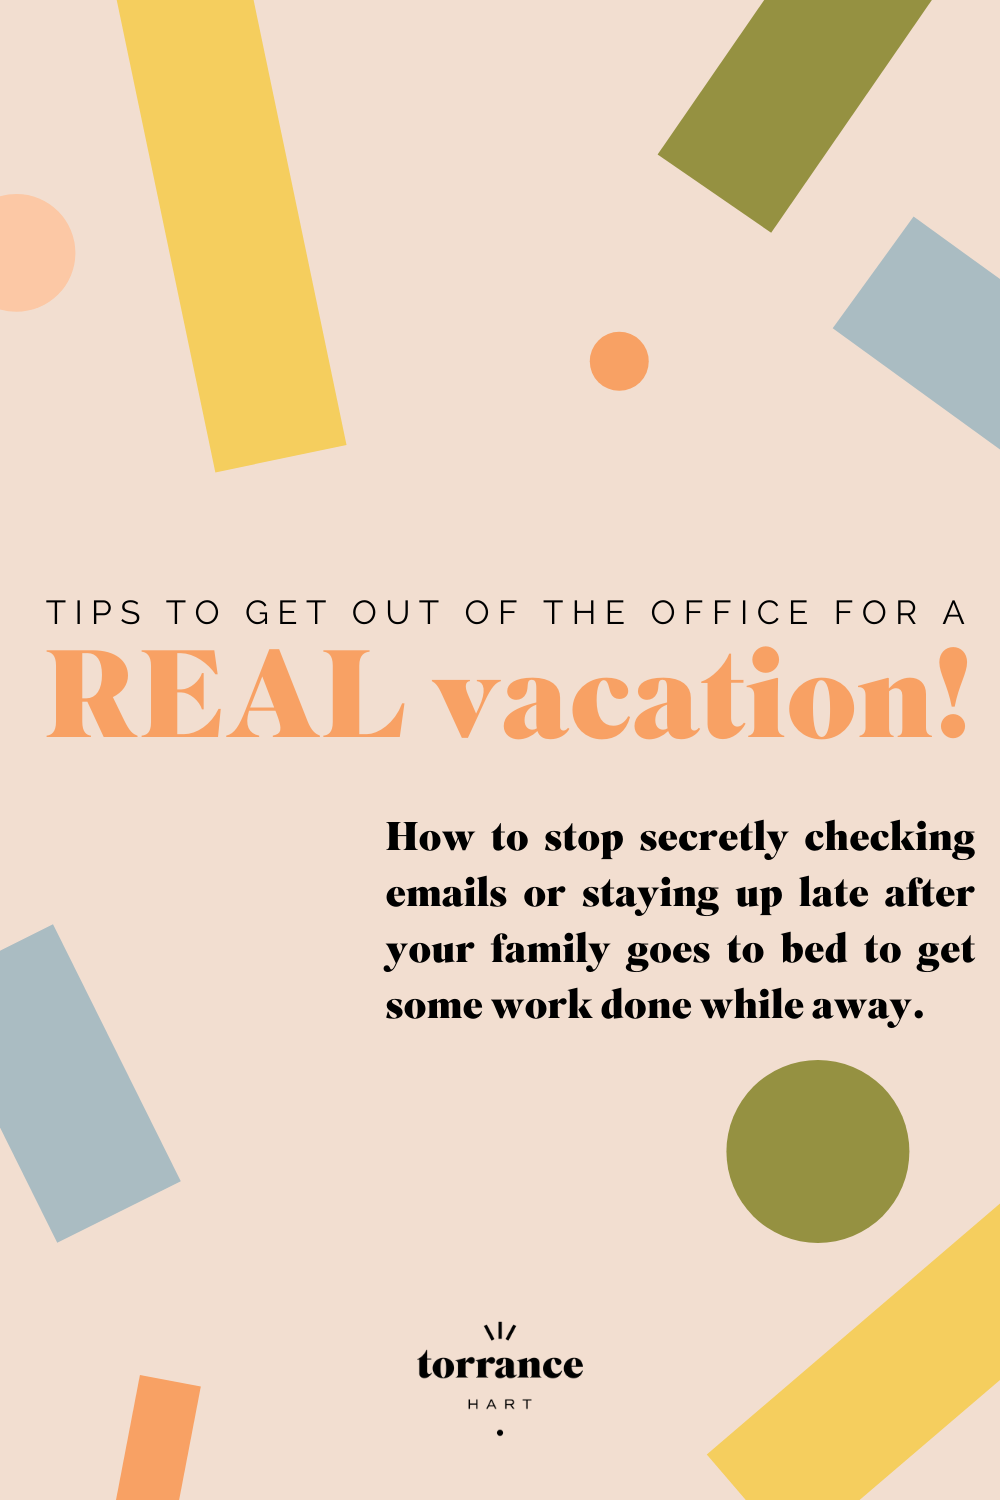 How to get out of the office for a REAL vacation